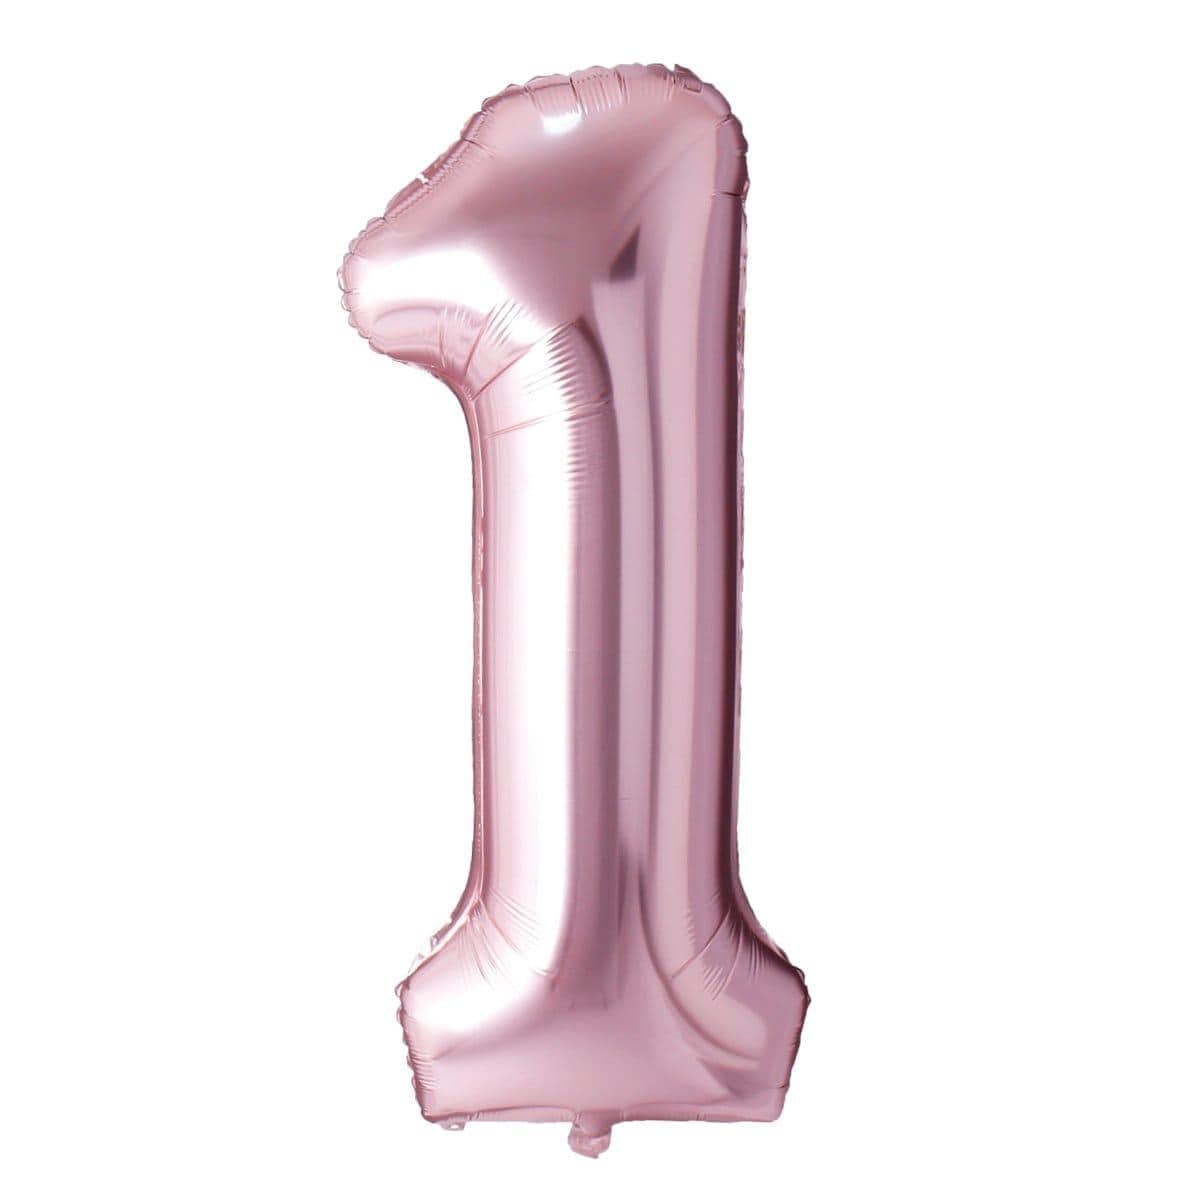 Buy Balloons Rose Gold Number 1 Foil Balloon, 34 Inches sold at Party Expert